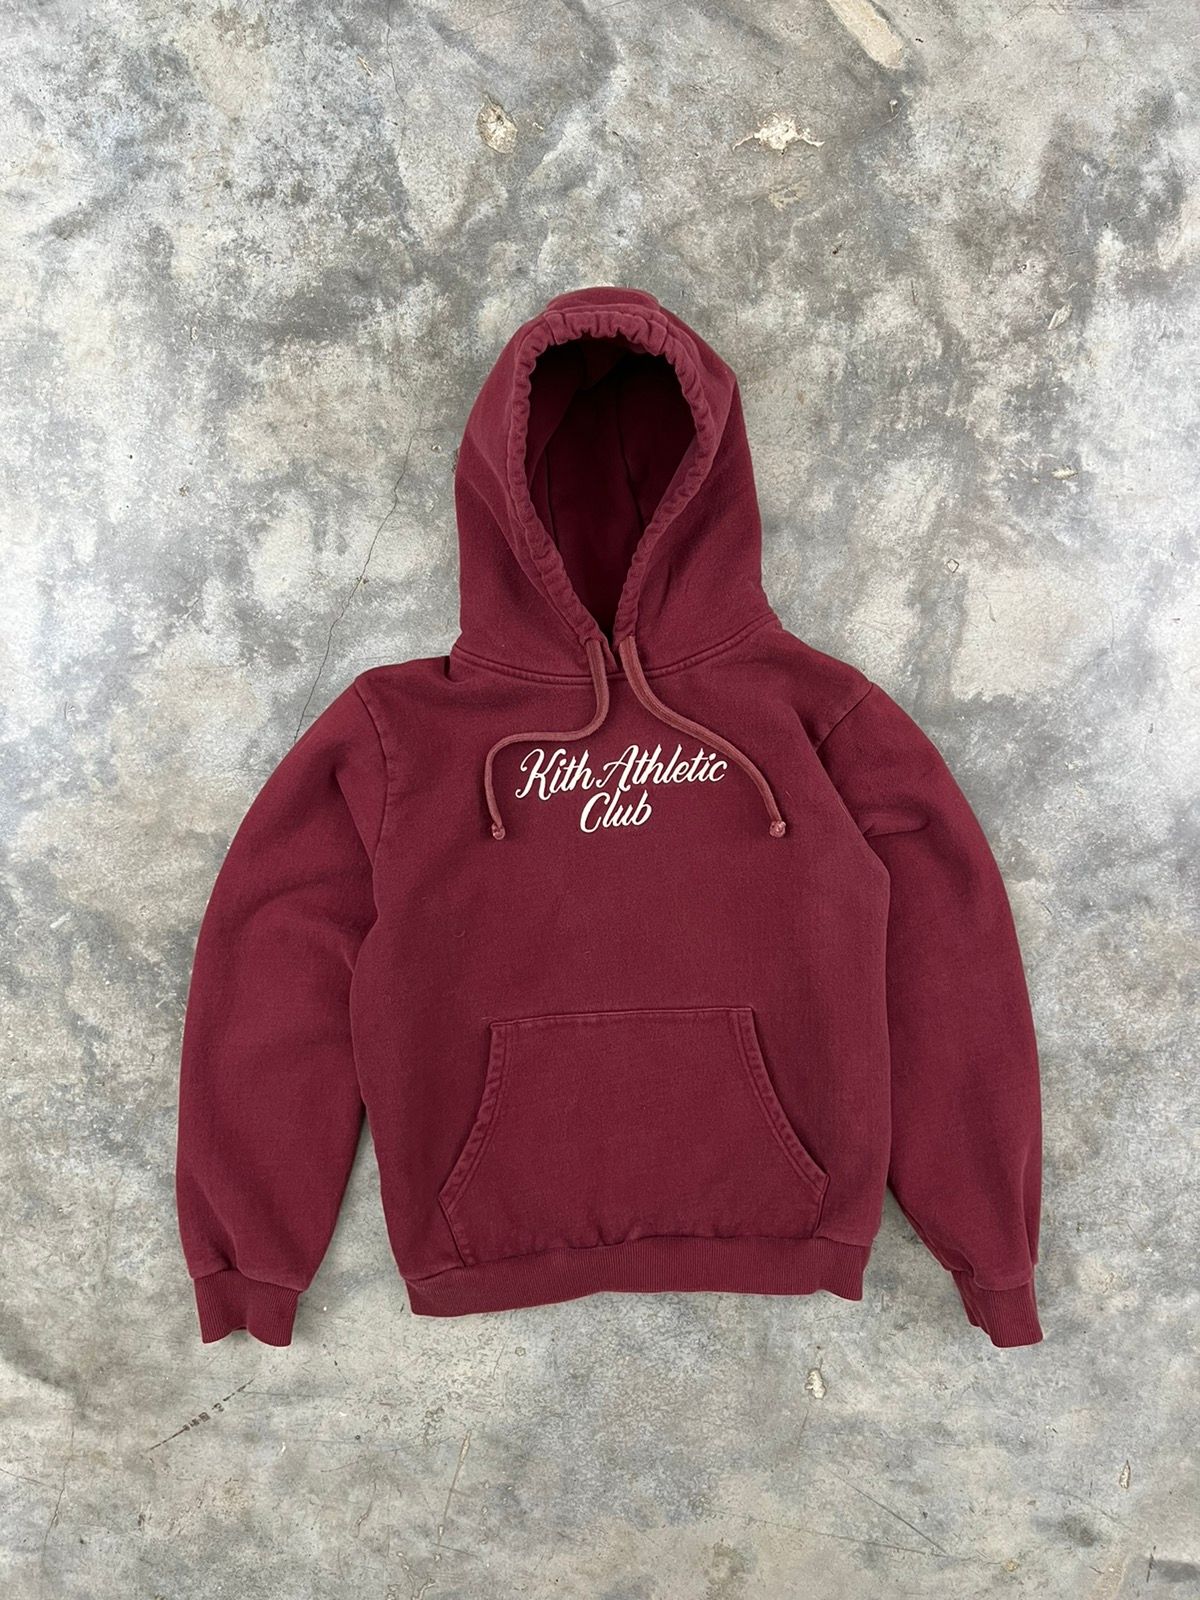 Pre-owned Kith Athletic Club Burgundy / Wine Embroidered Logo Hoodie